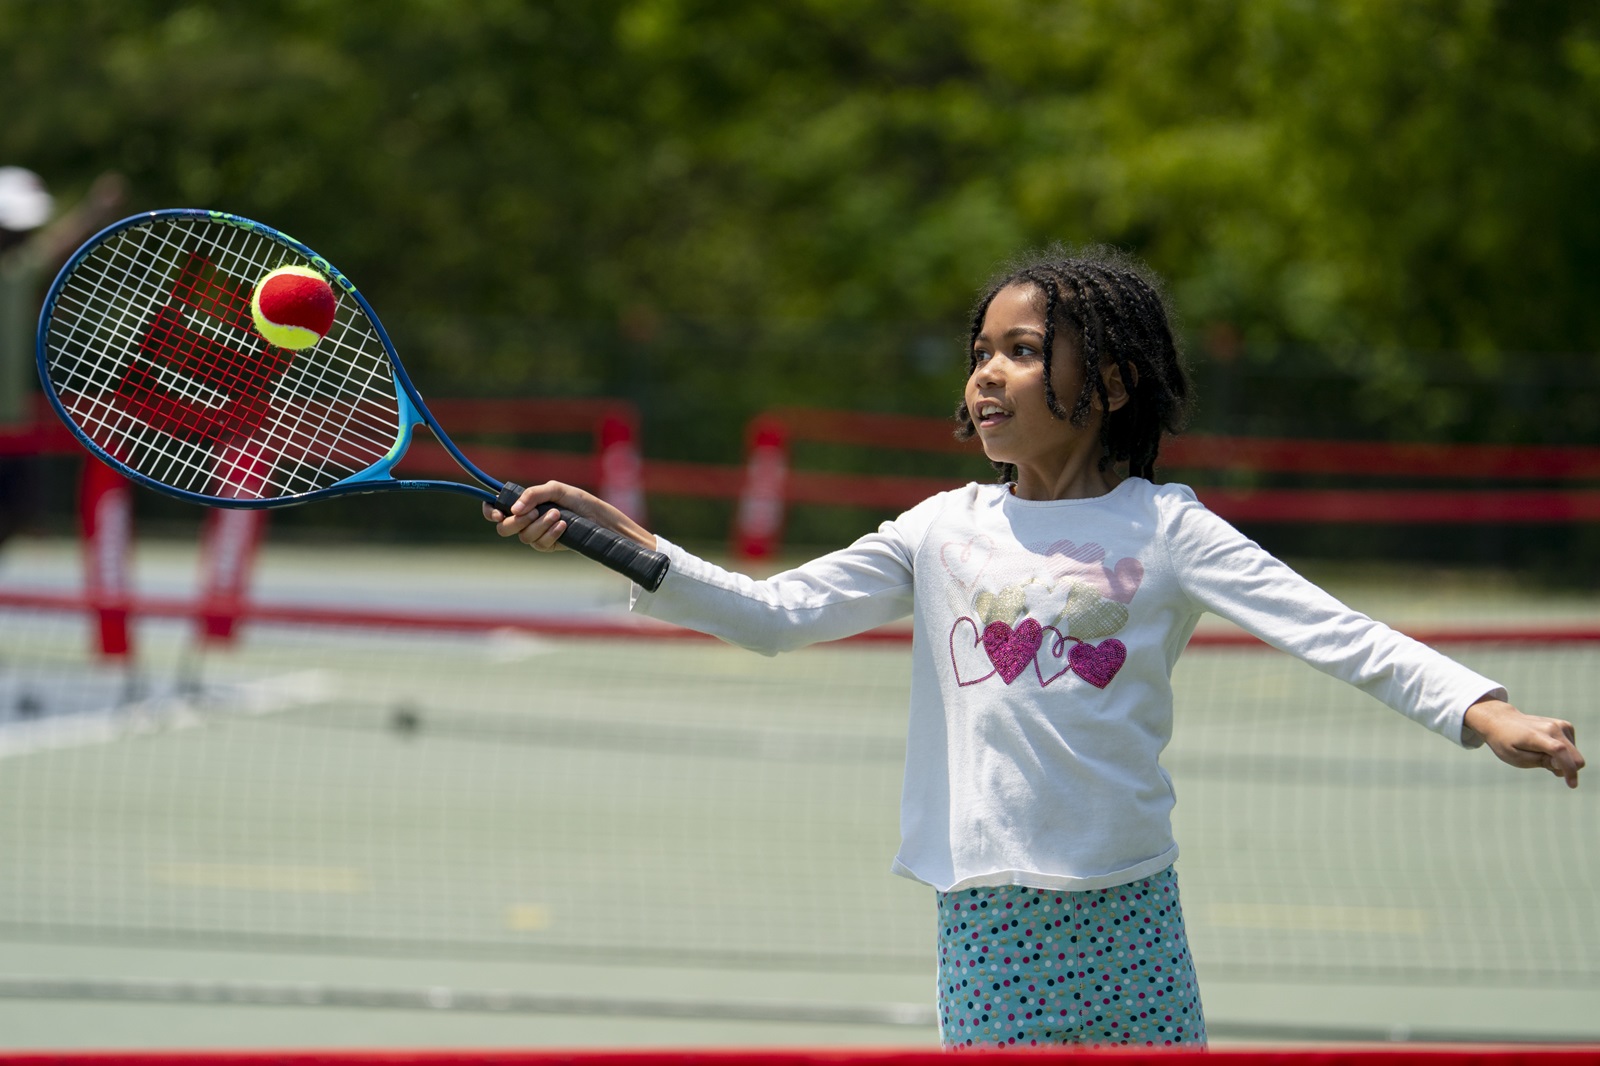 Tennis in Canada is on the rise, and young people are leading the charge